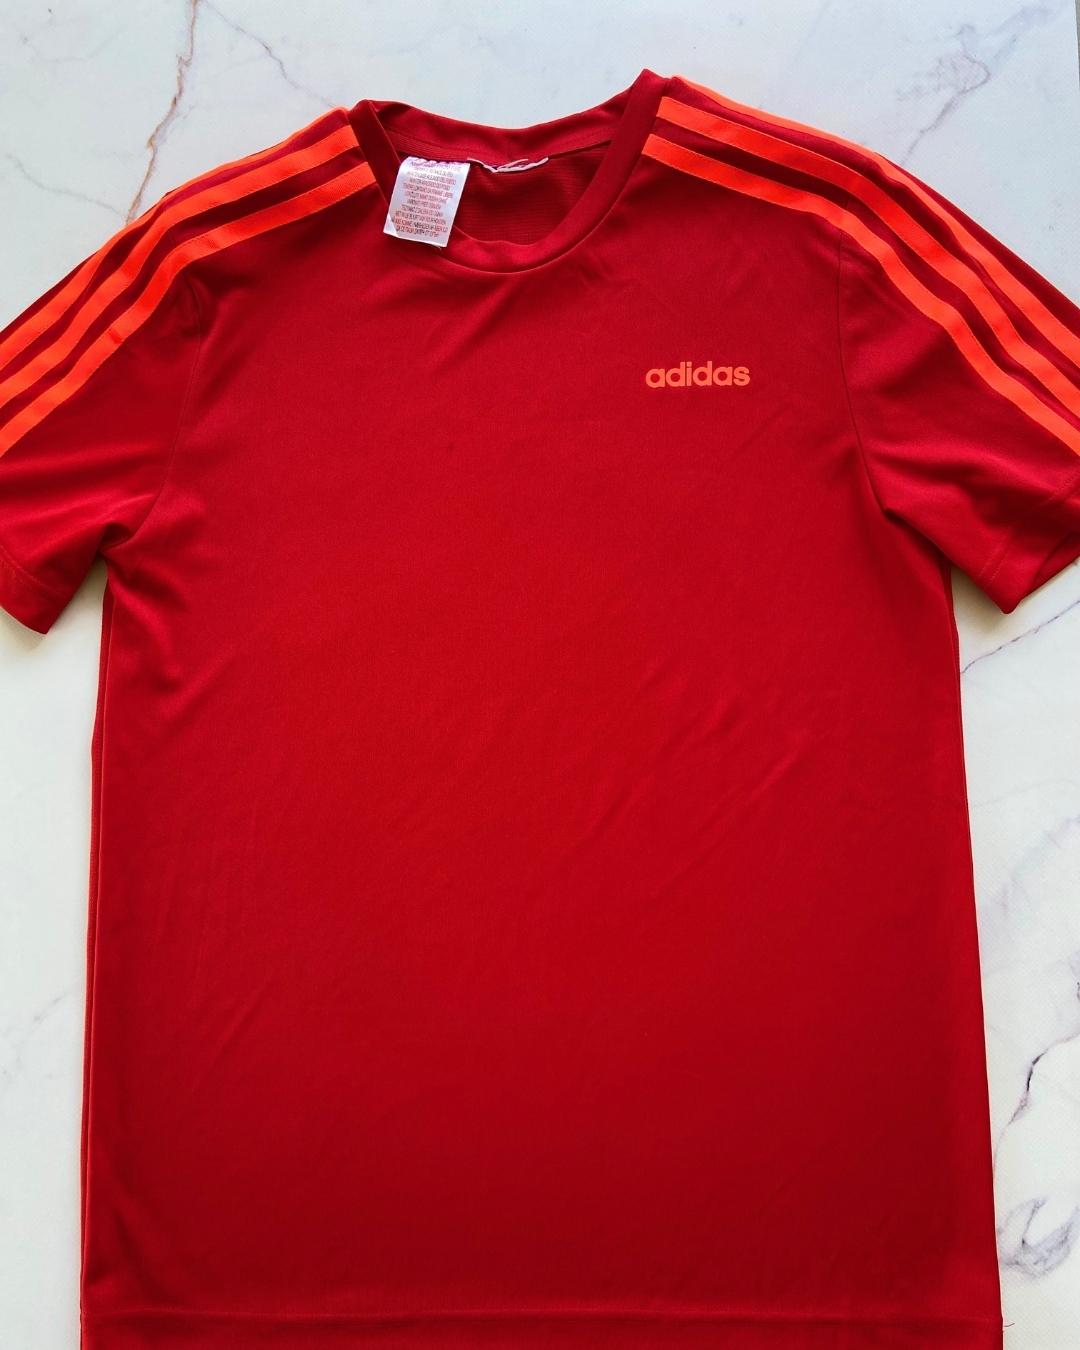 Adidas red dri-fit shirt – 11/12Y – Nearly New Kids